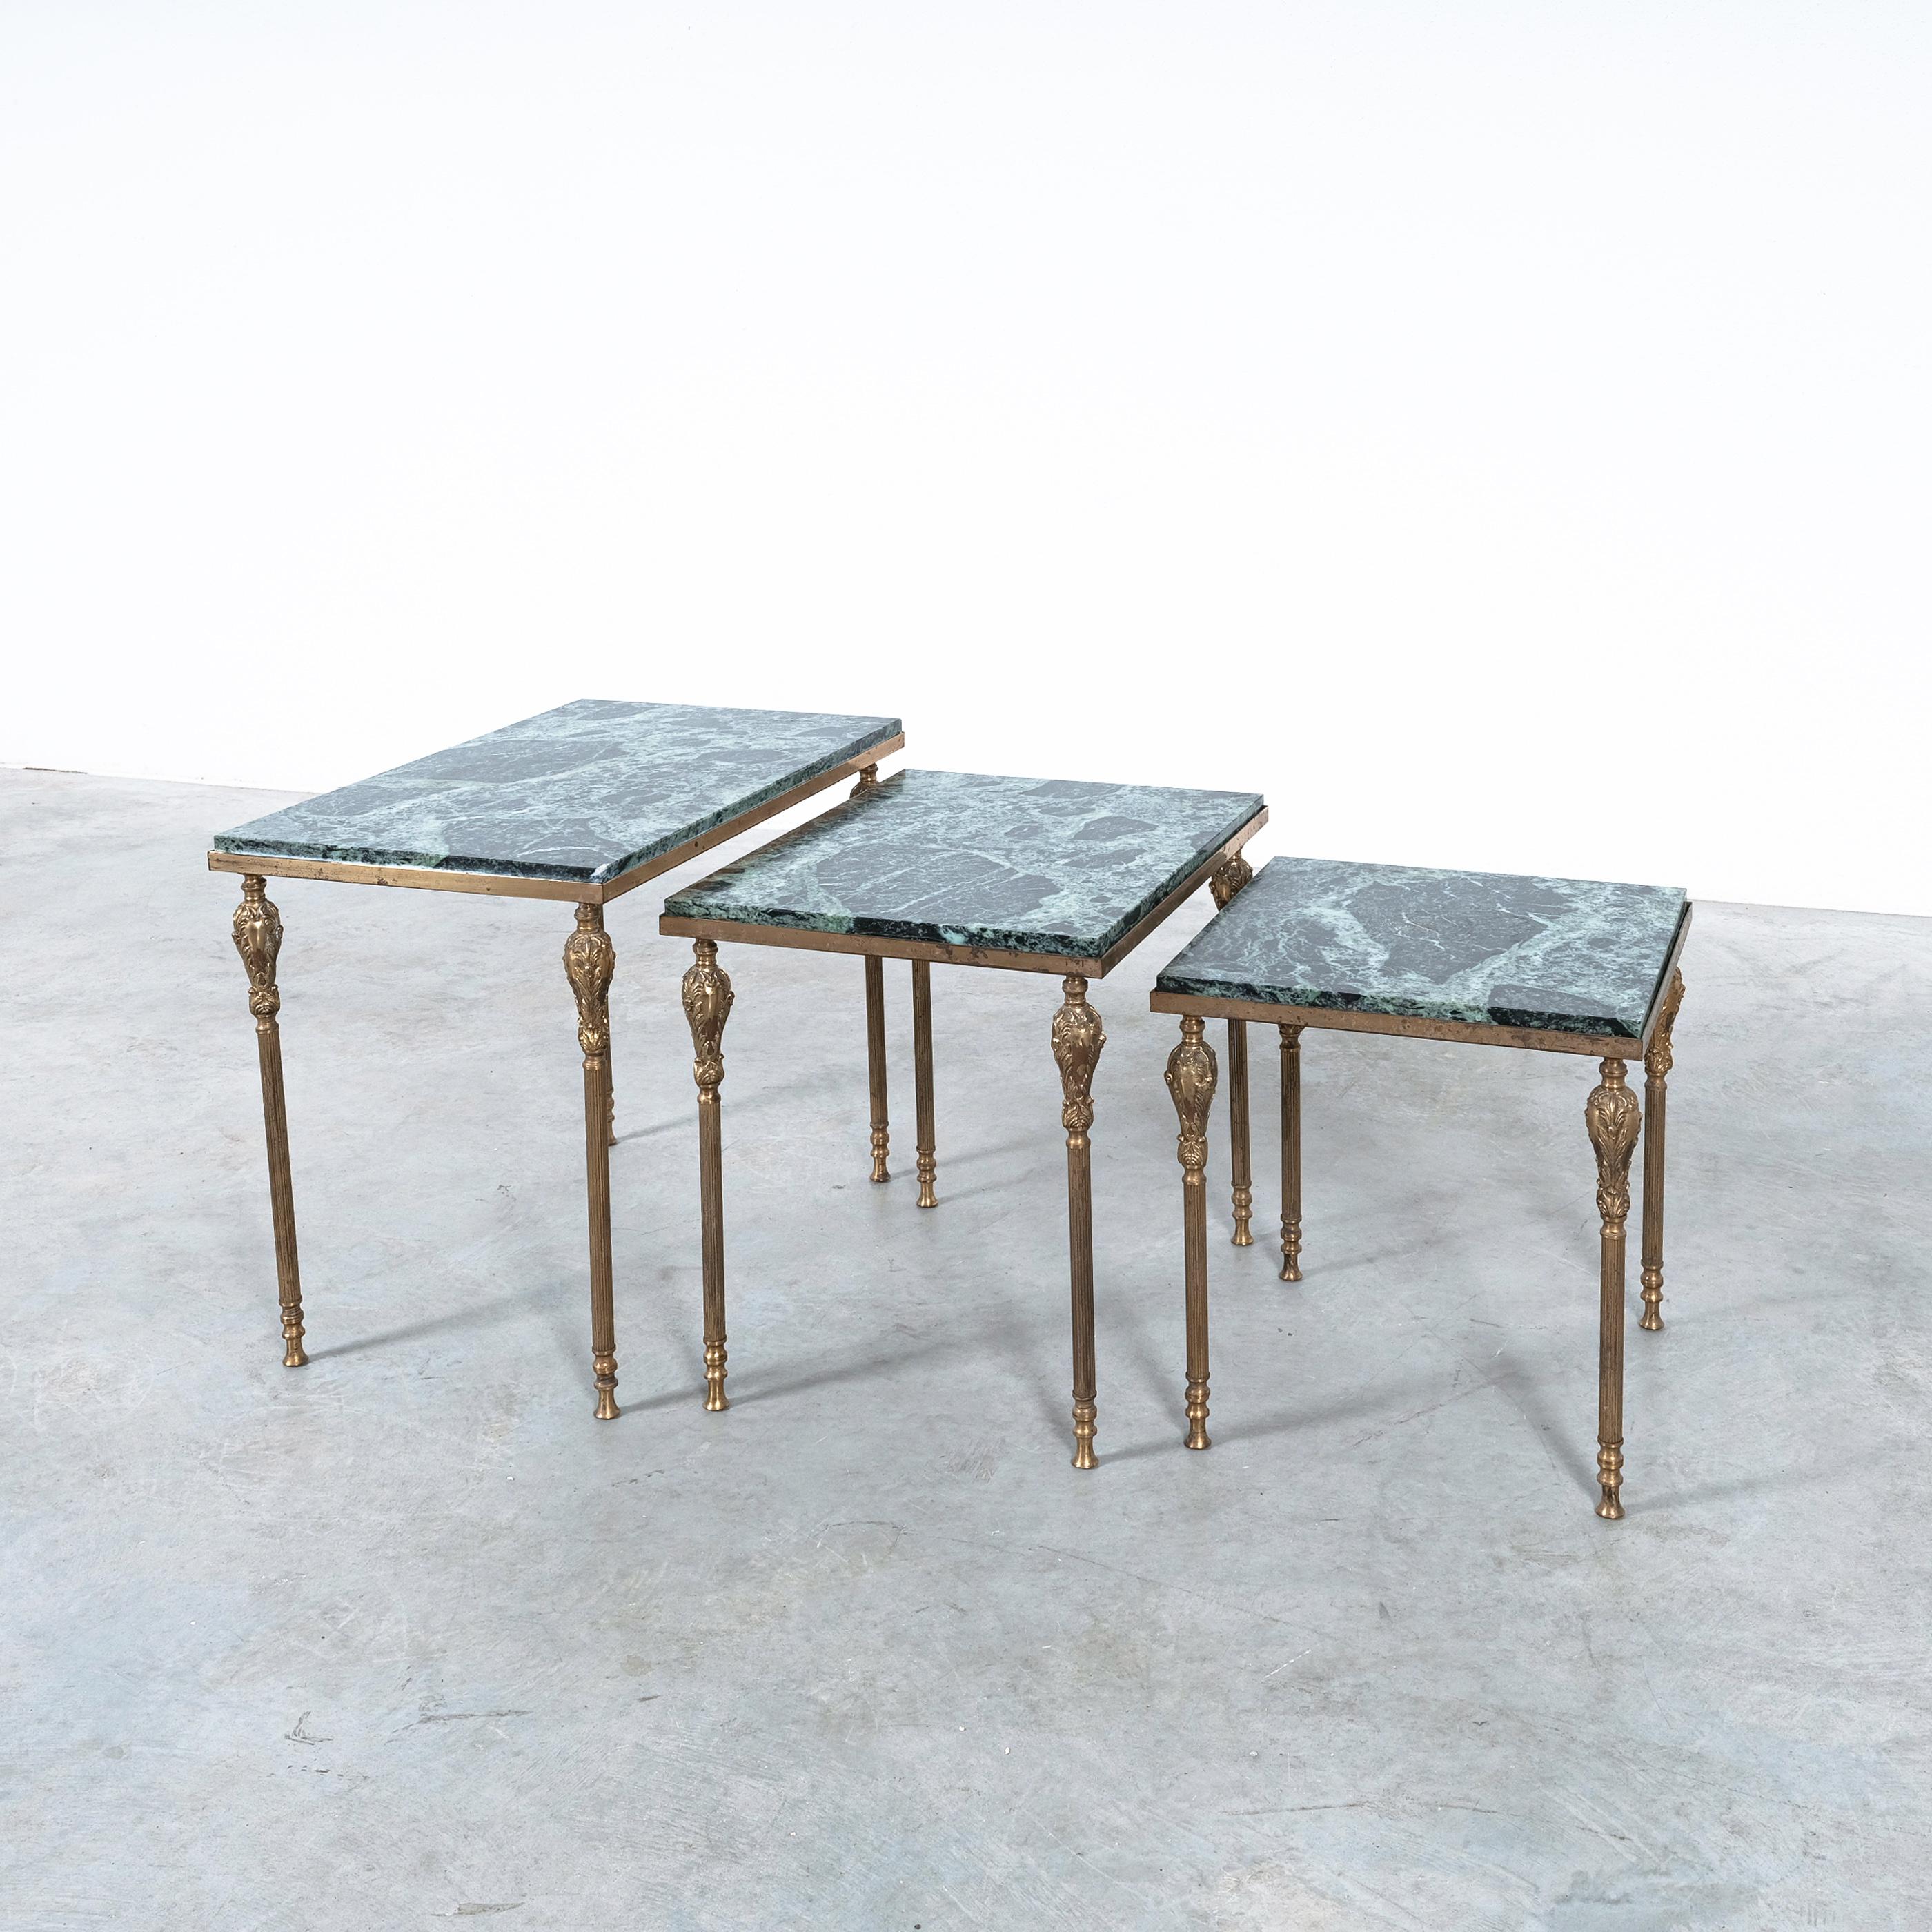 Nest of tables with green marble tops, France circa 1940

Set of three side tables in original vintage mid century condition. The slender columns are from brass and iron and show some corinthian motives like the acanthus leaf. The metal work shows